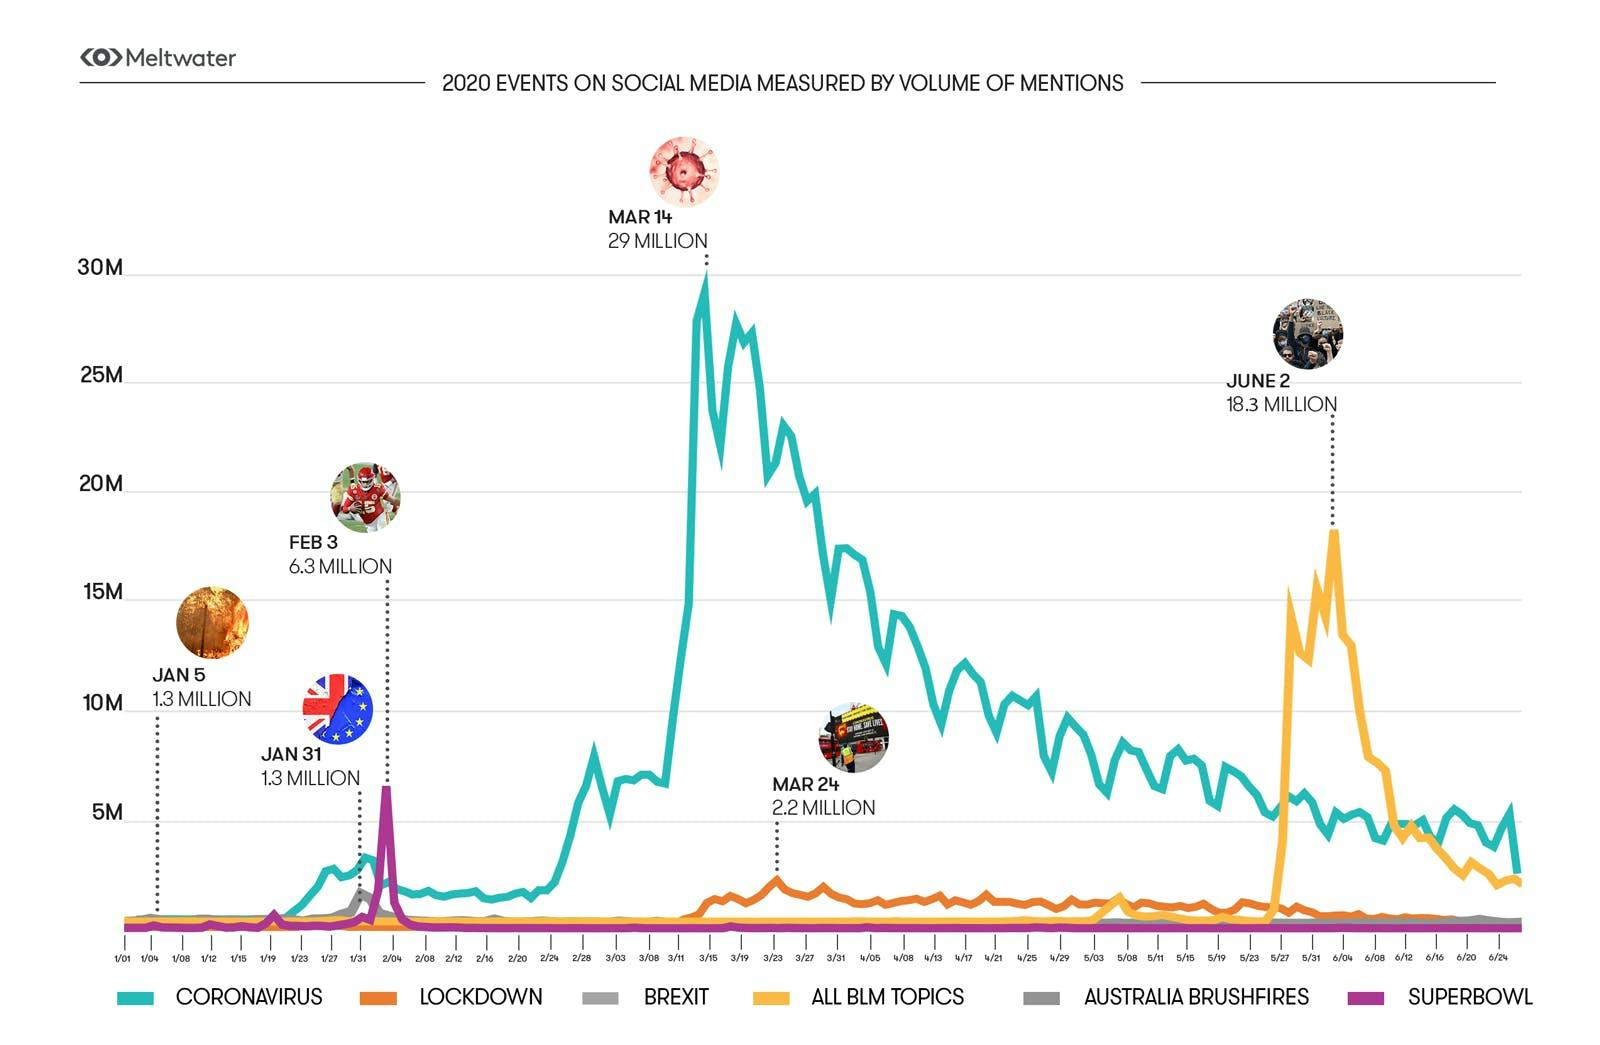 Social Media Day: The biggest conversations of 2020 on social media as measured by volume